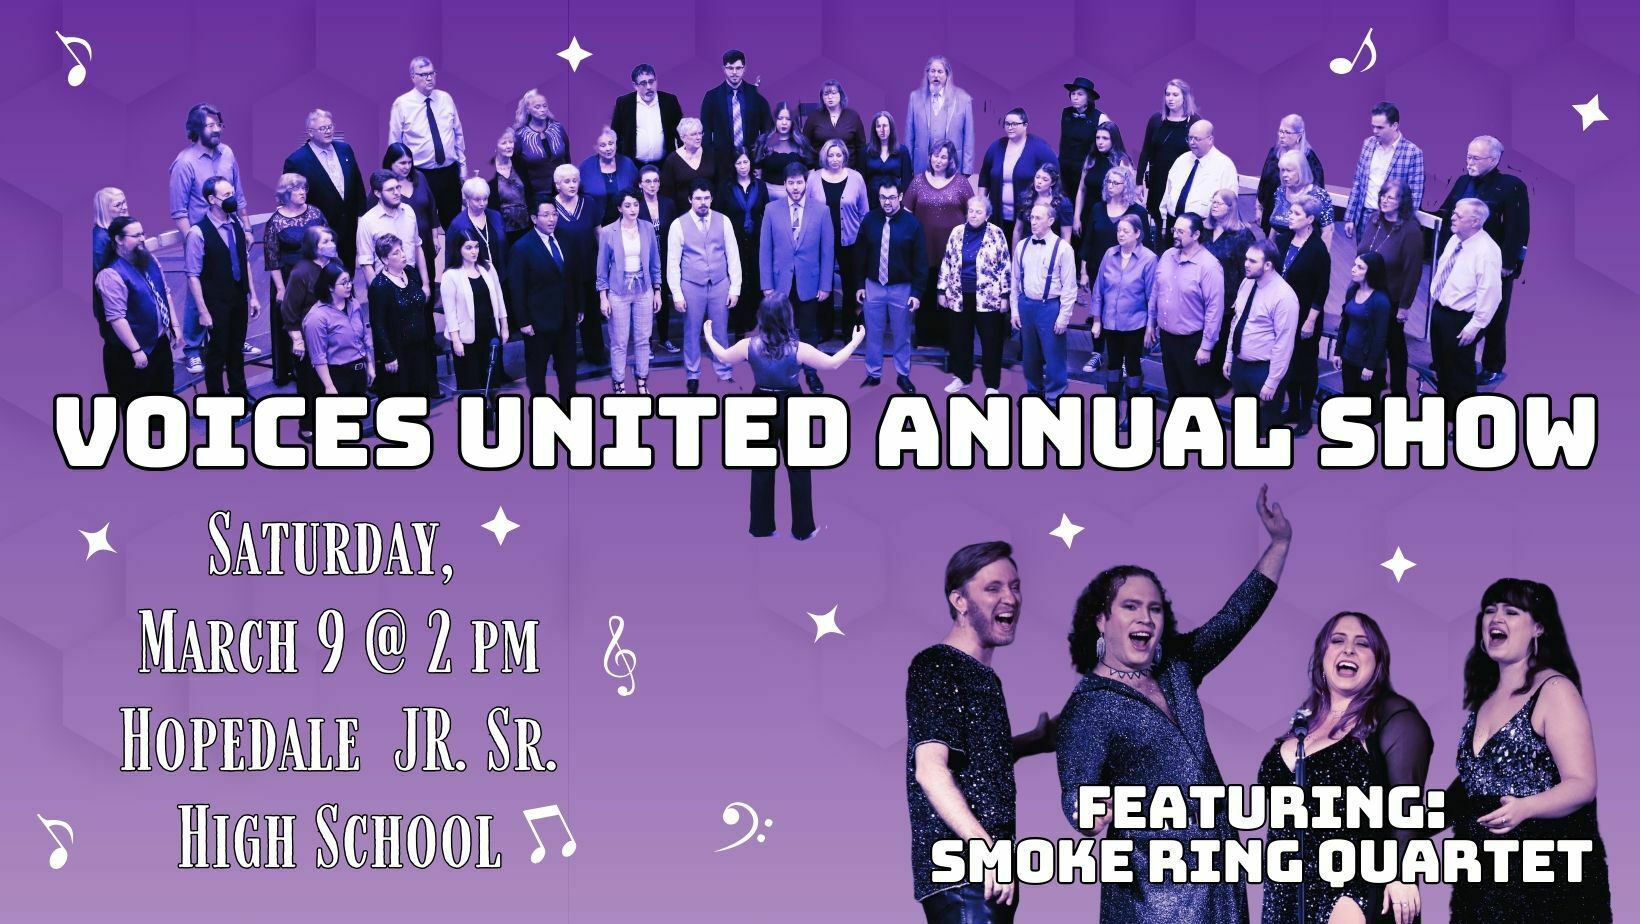 Voices United Annual Show, Hopedale, Massachusetts, United States